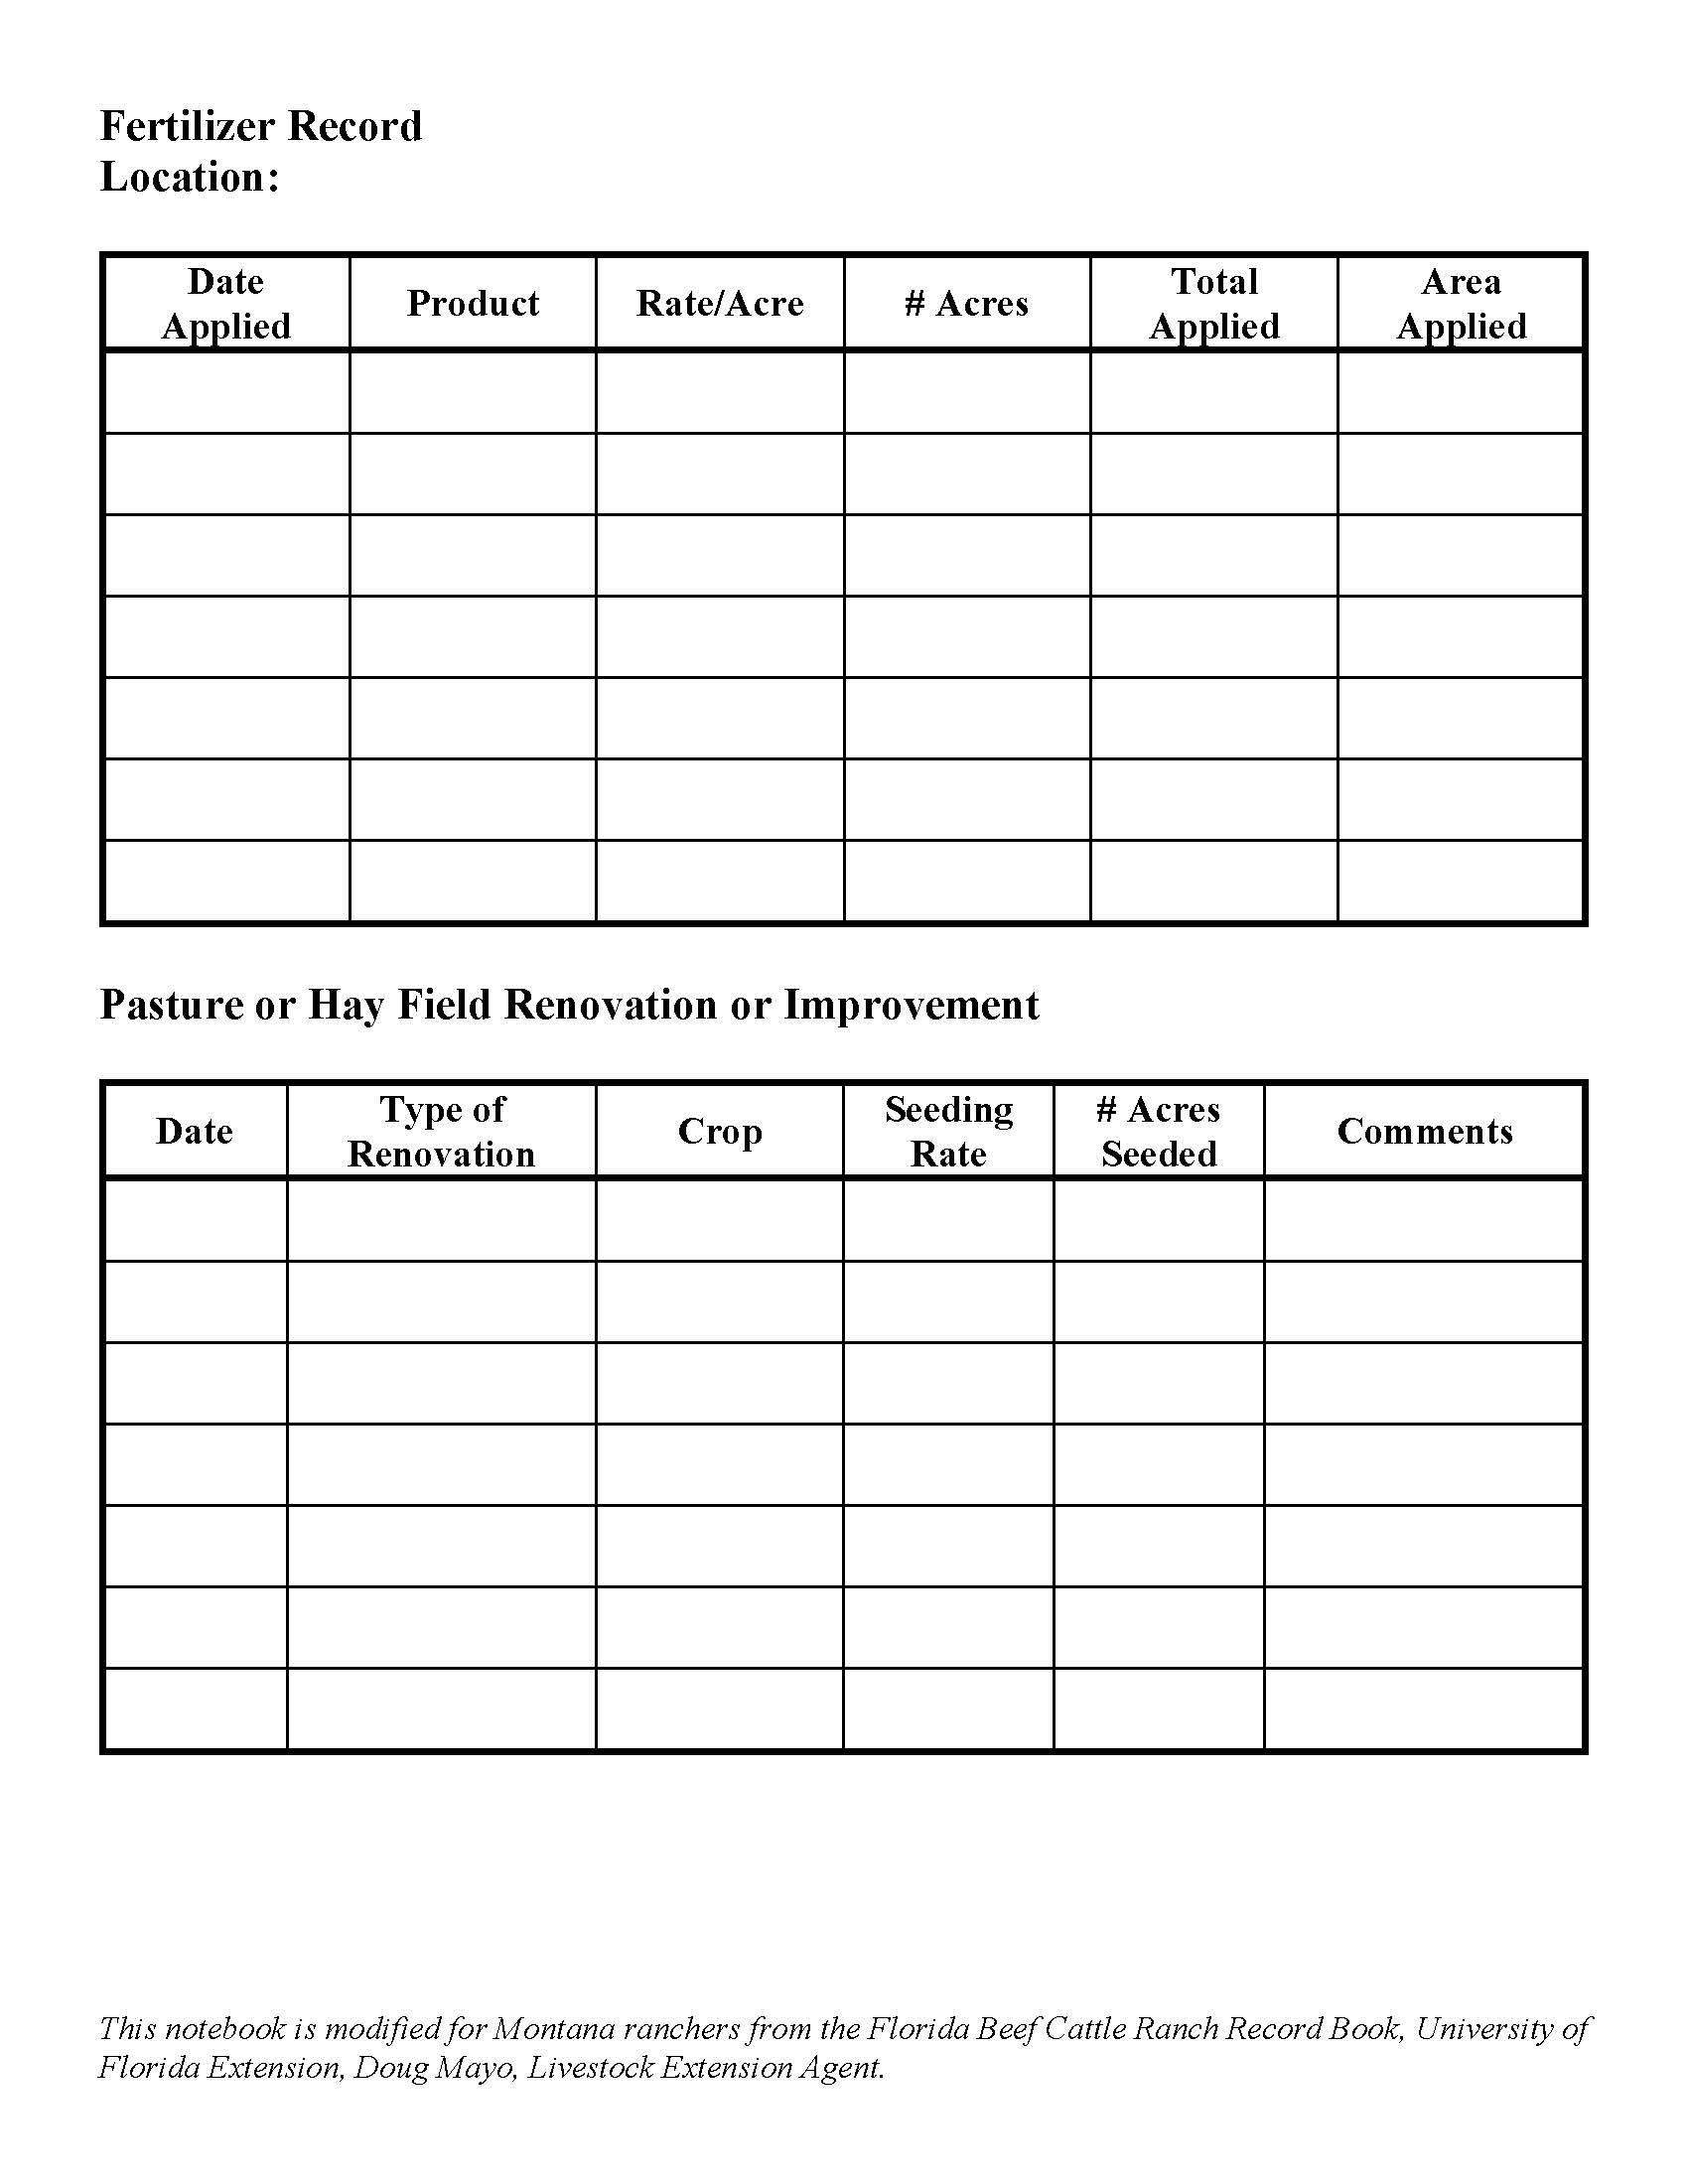 A sample table of recording keeping for fertilizer use on pastures. Another information tool for the rancher notebook.